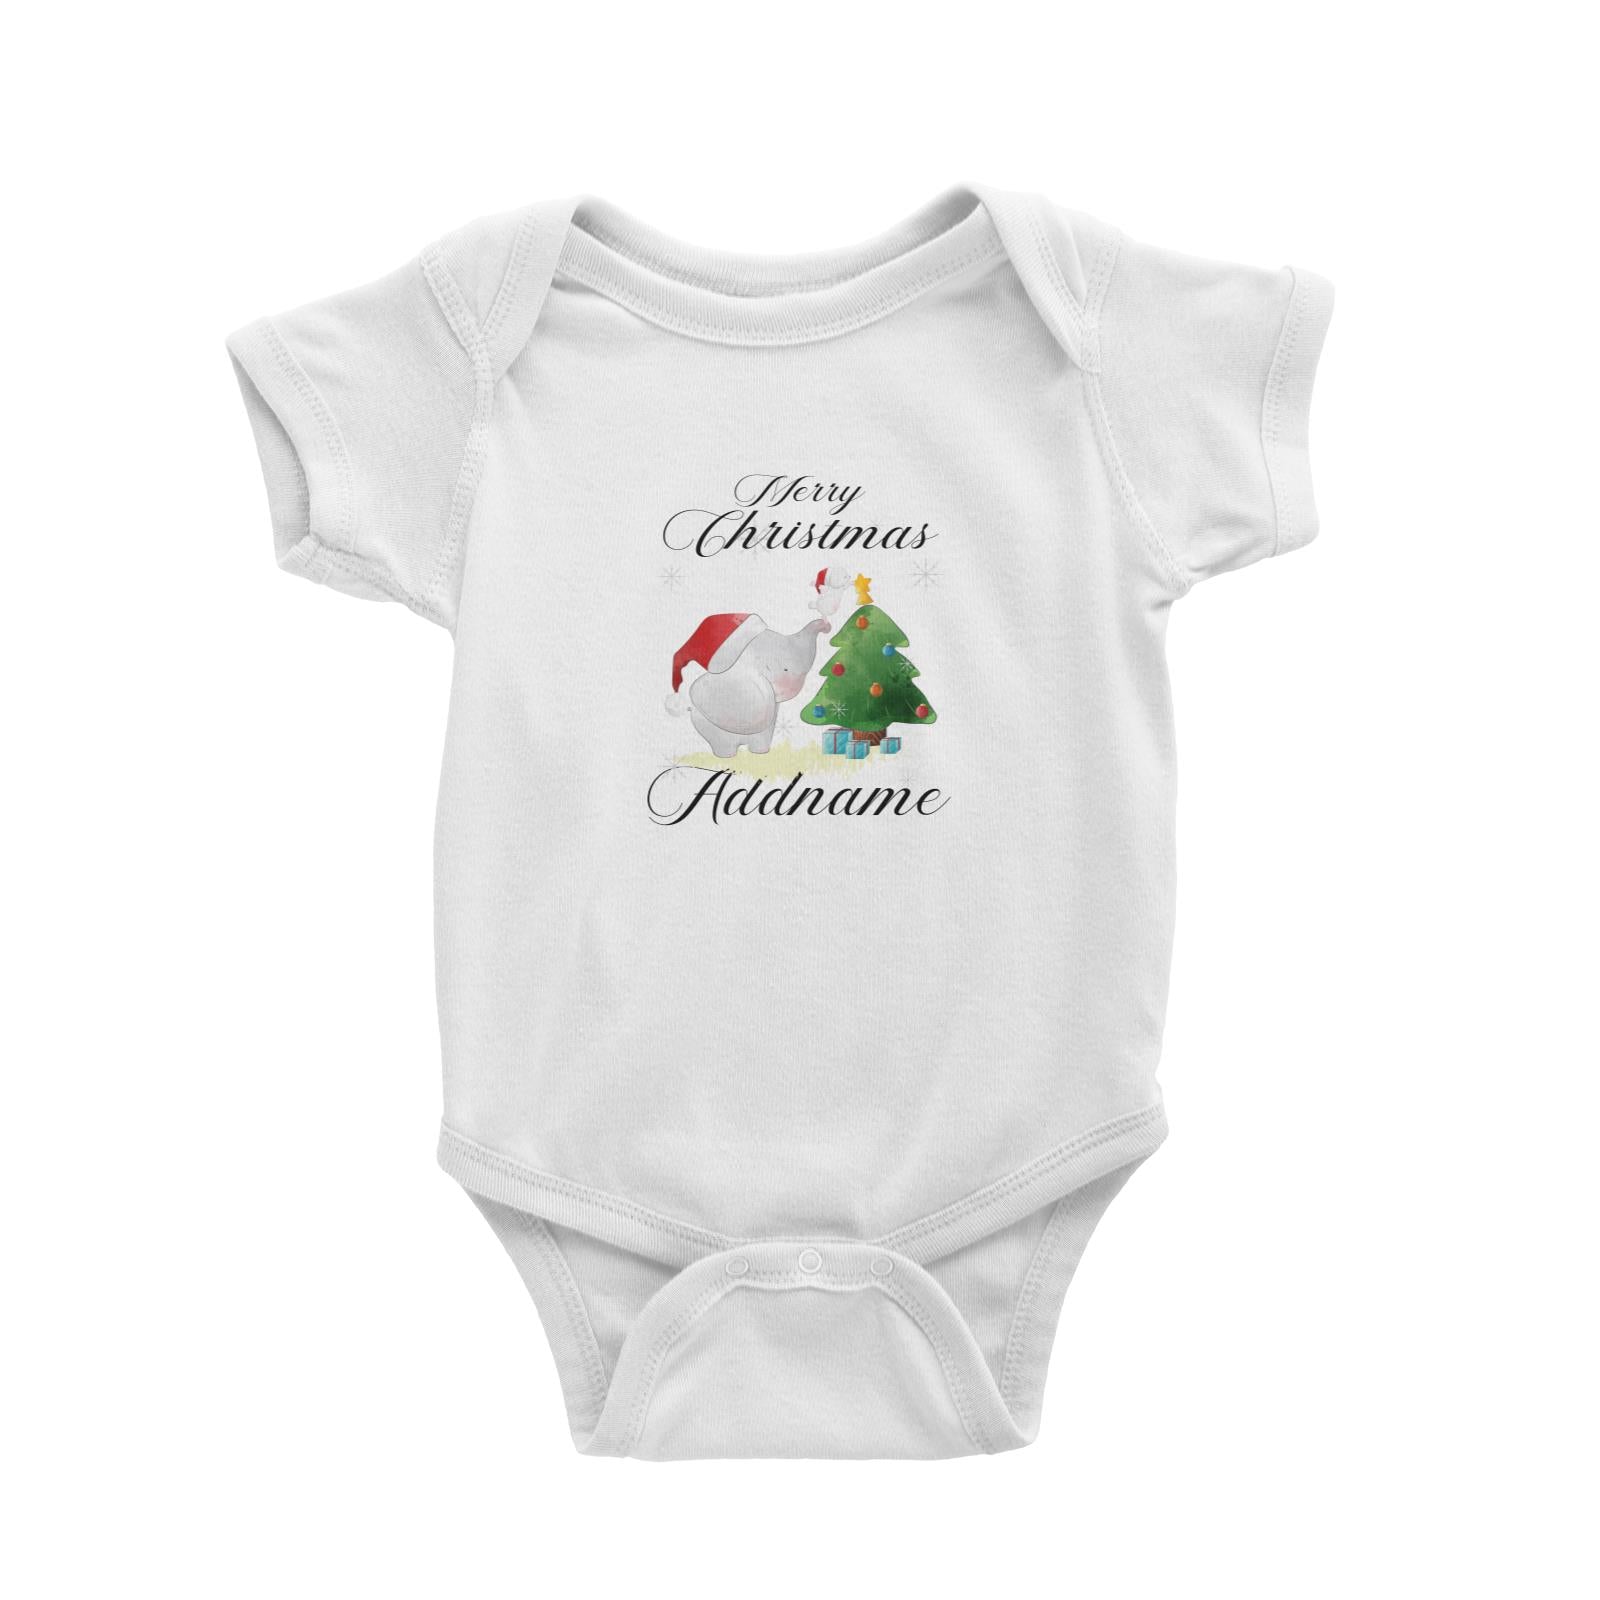 Christmas Cute Elephant Merry Christmas Addname Baby Romper